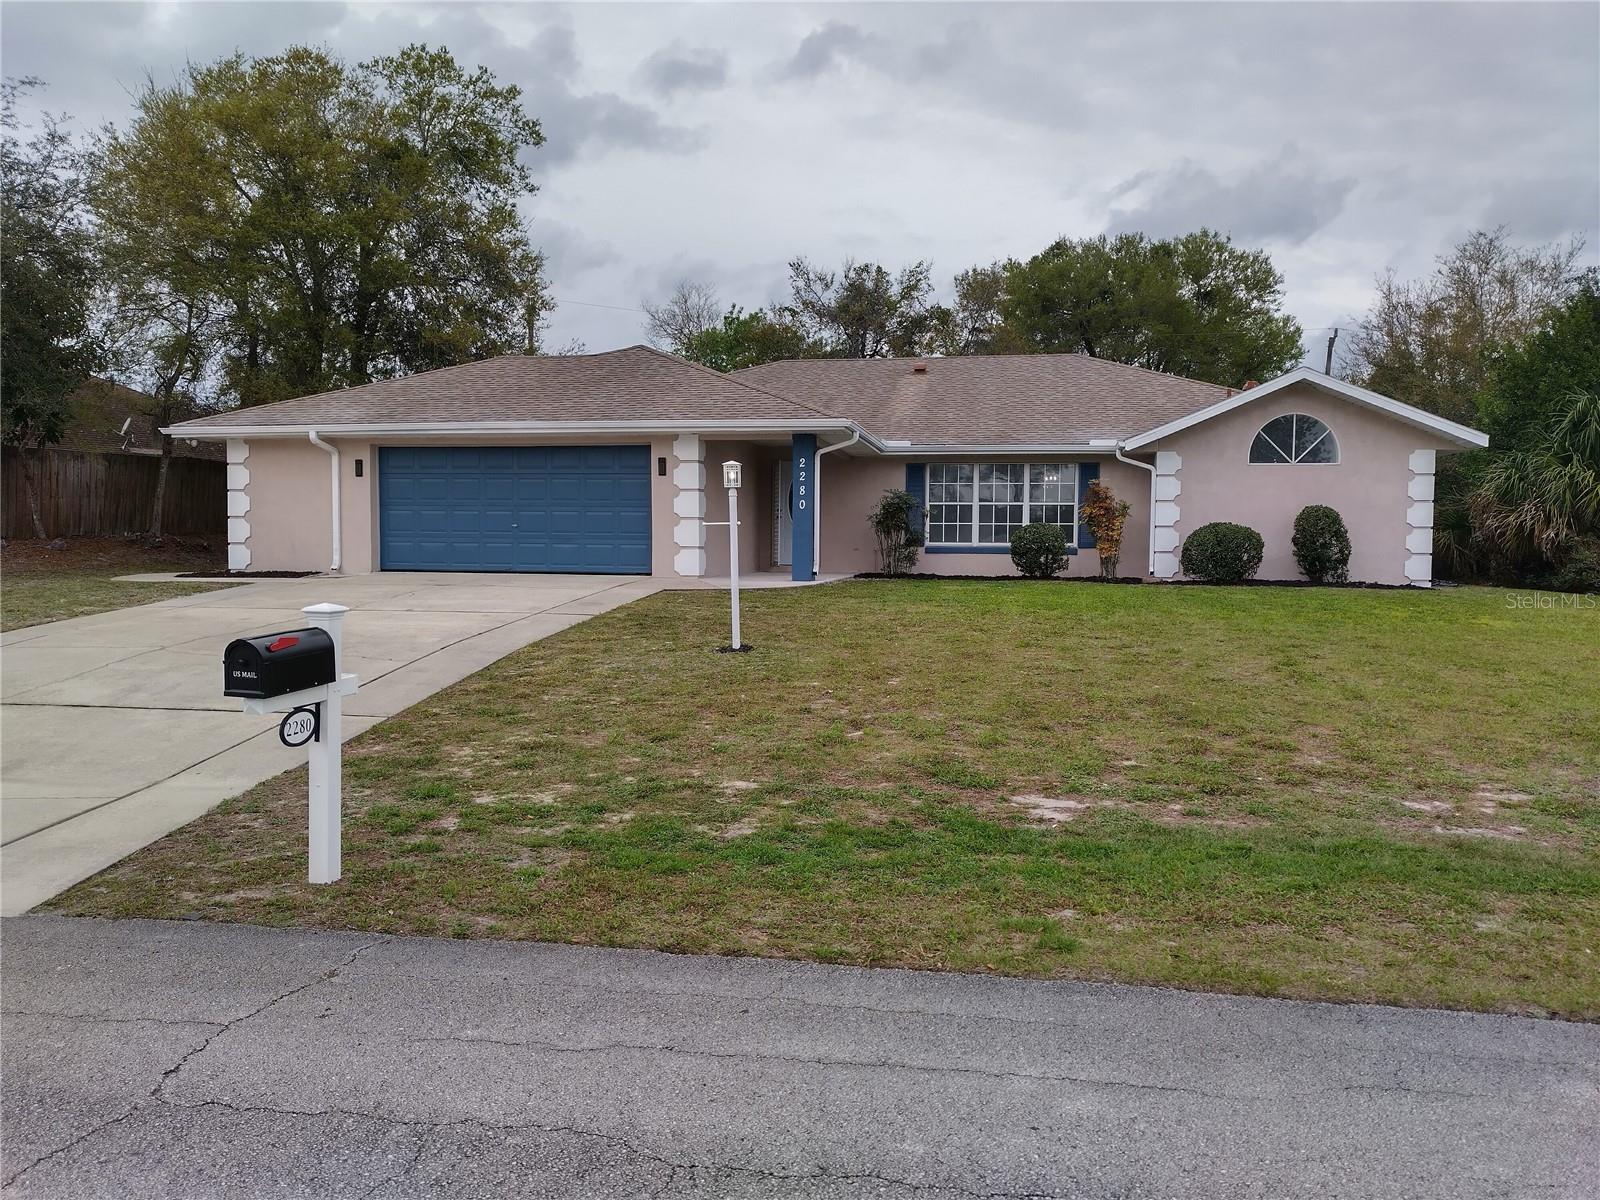 2280 CARSON LANE, 3 Bedrooms Bedrooms, ,2 BathroomsBathrooms,Residential,For Sale,CARSON,MFRT3513046